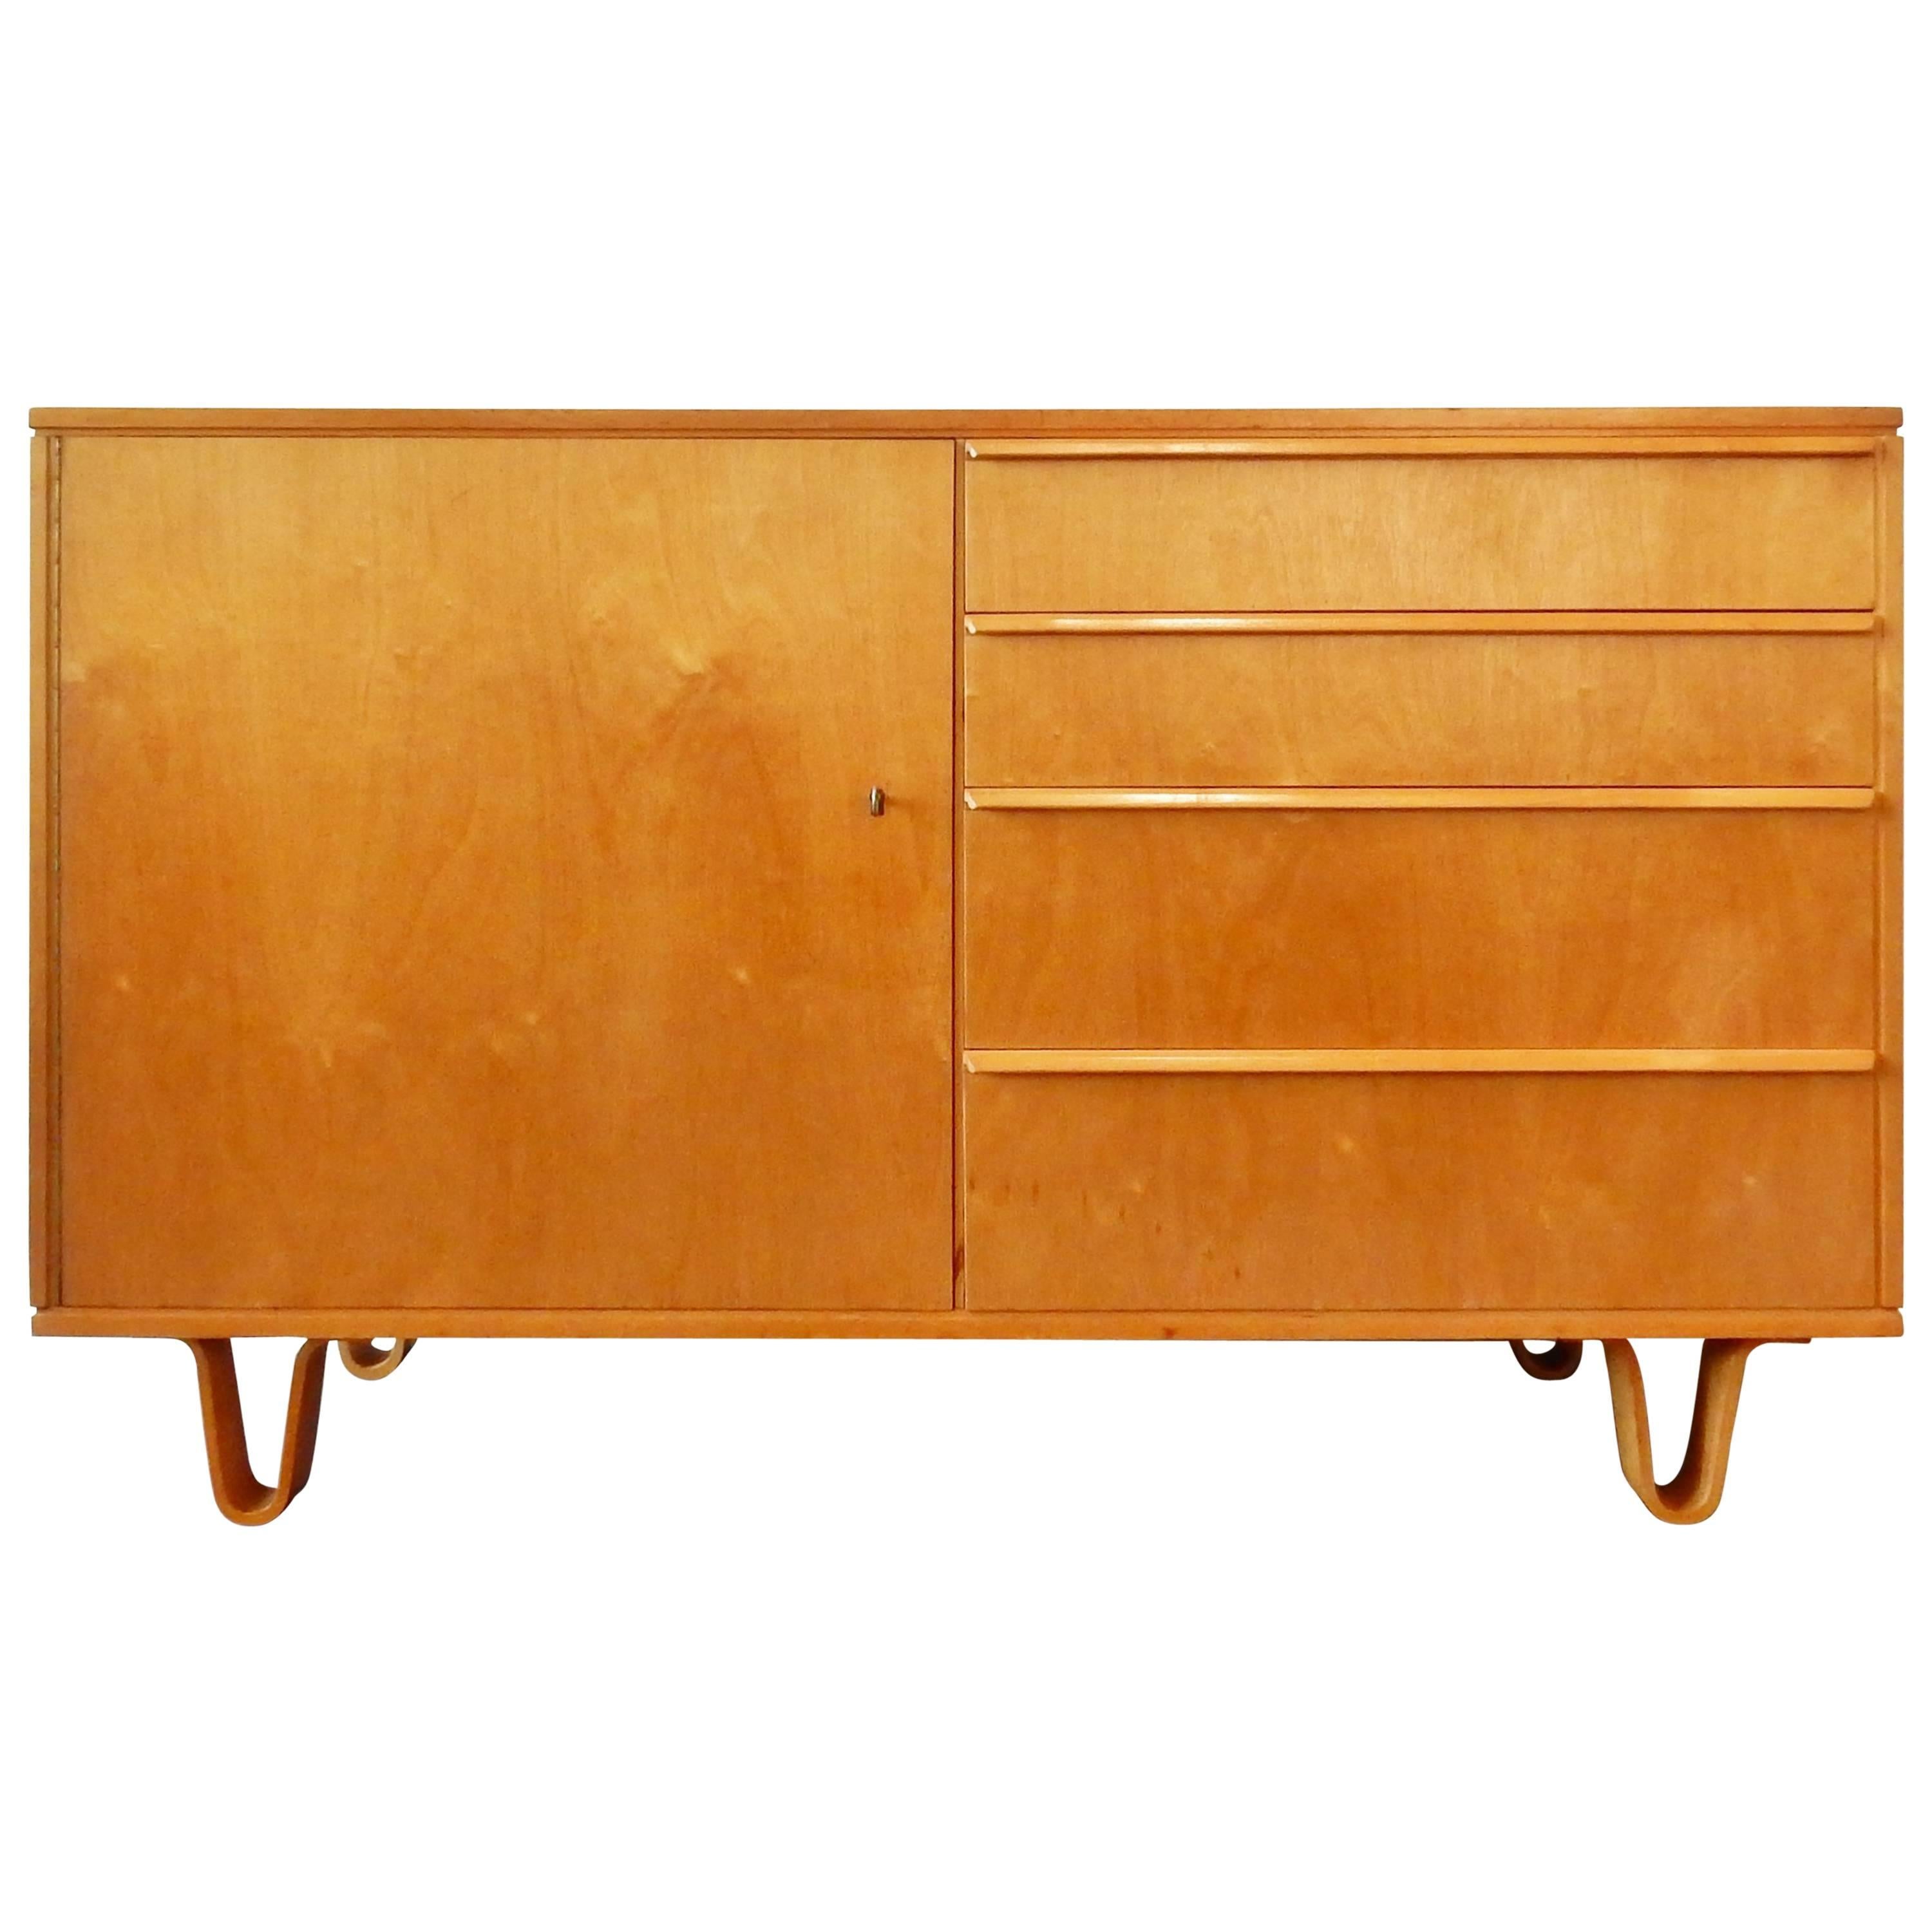 'Db01' Sideboard or Credenza by Cees Braakman for Pastoe, Netherlands, 1950s